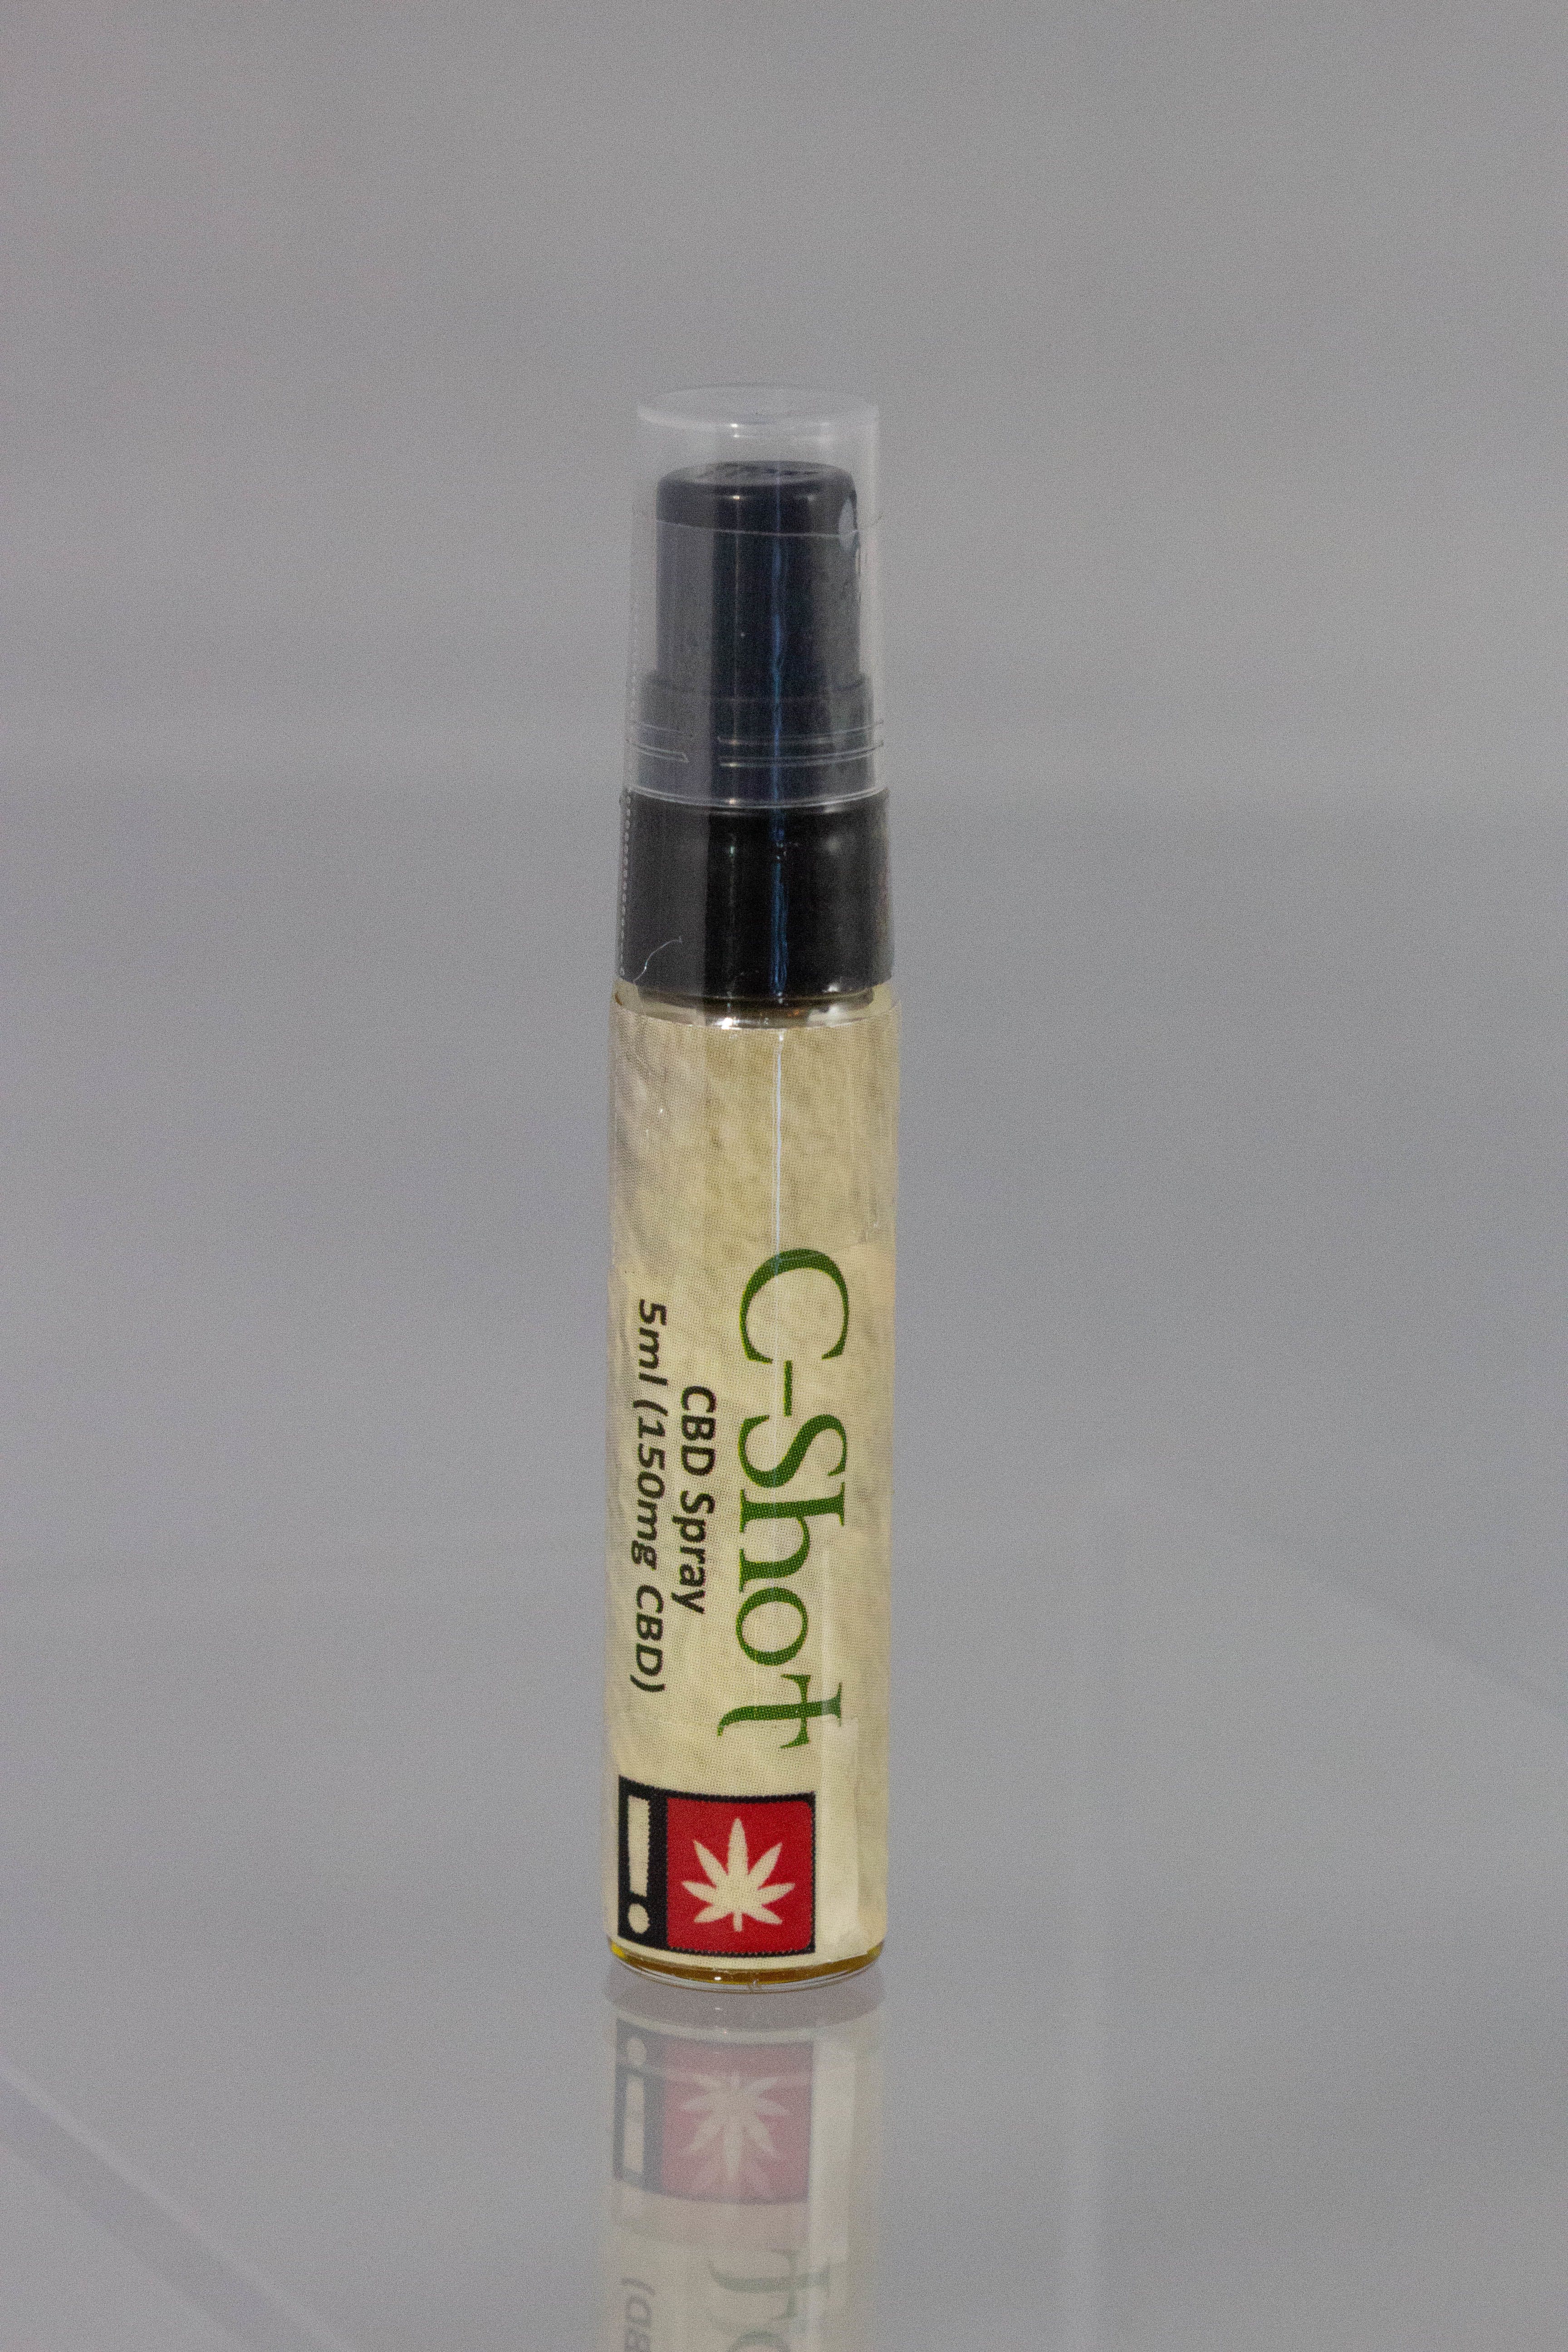 tincture-the-kure-cannabis-tincture-spray-by-green-dragon-extracts